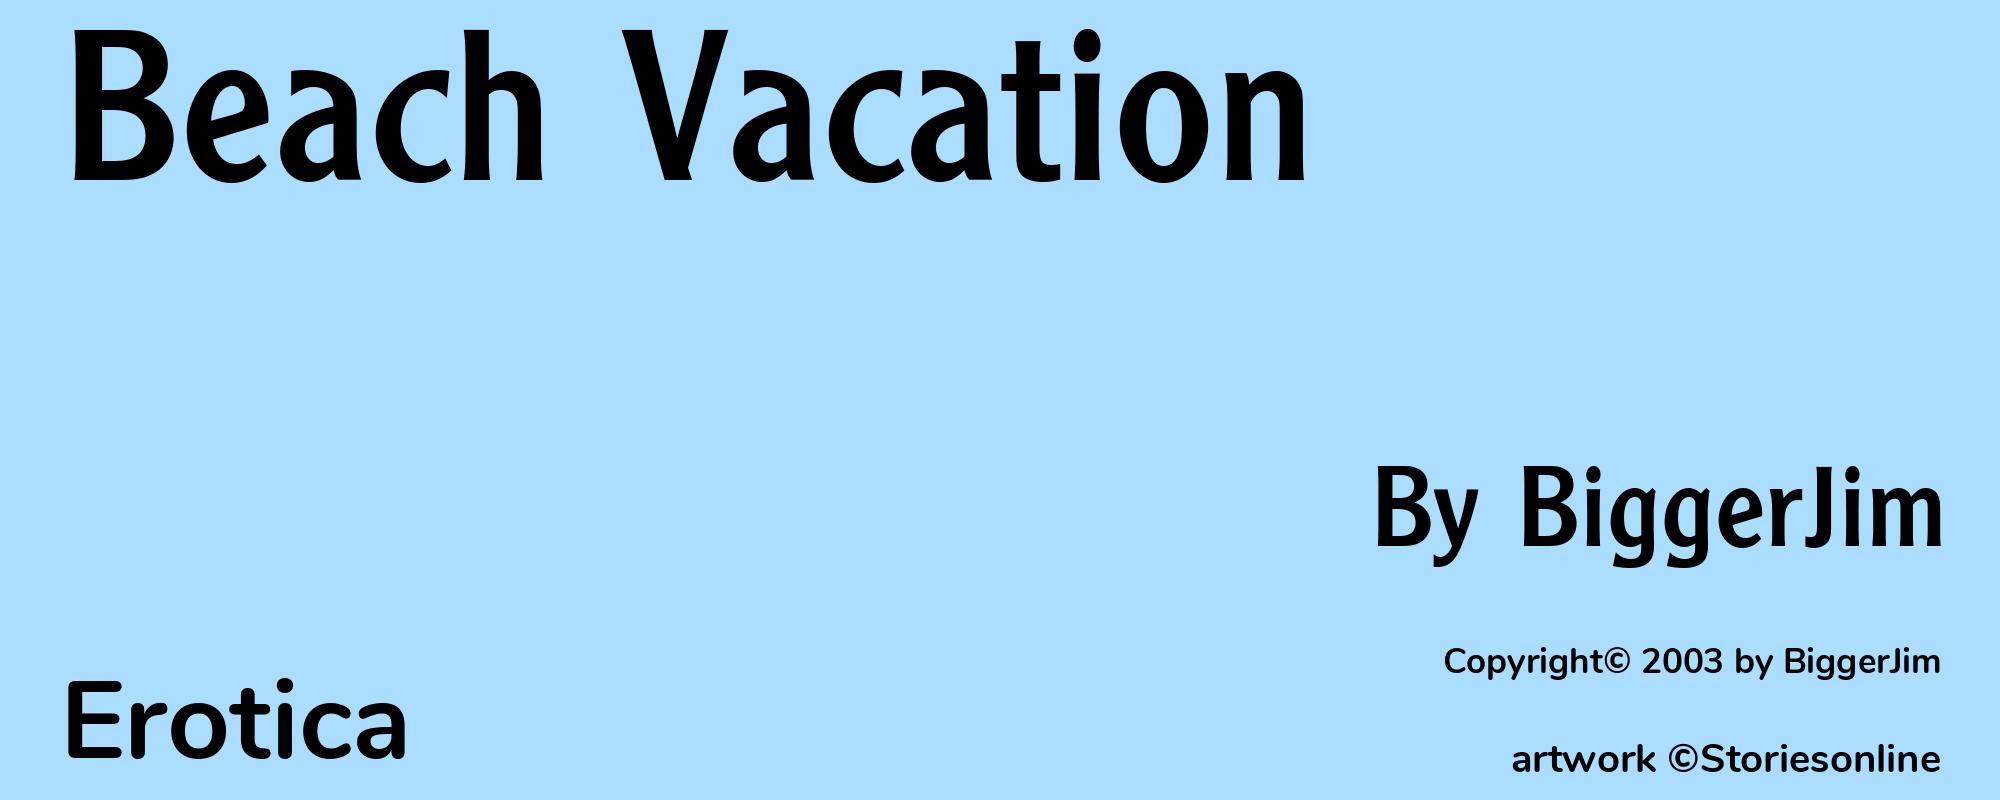 Beach Vacation - Cover